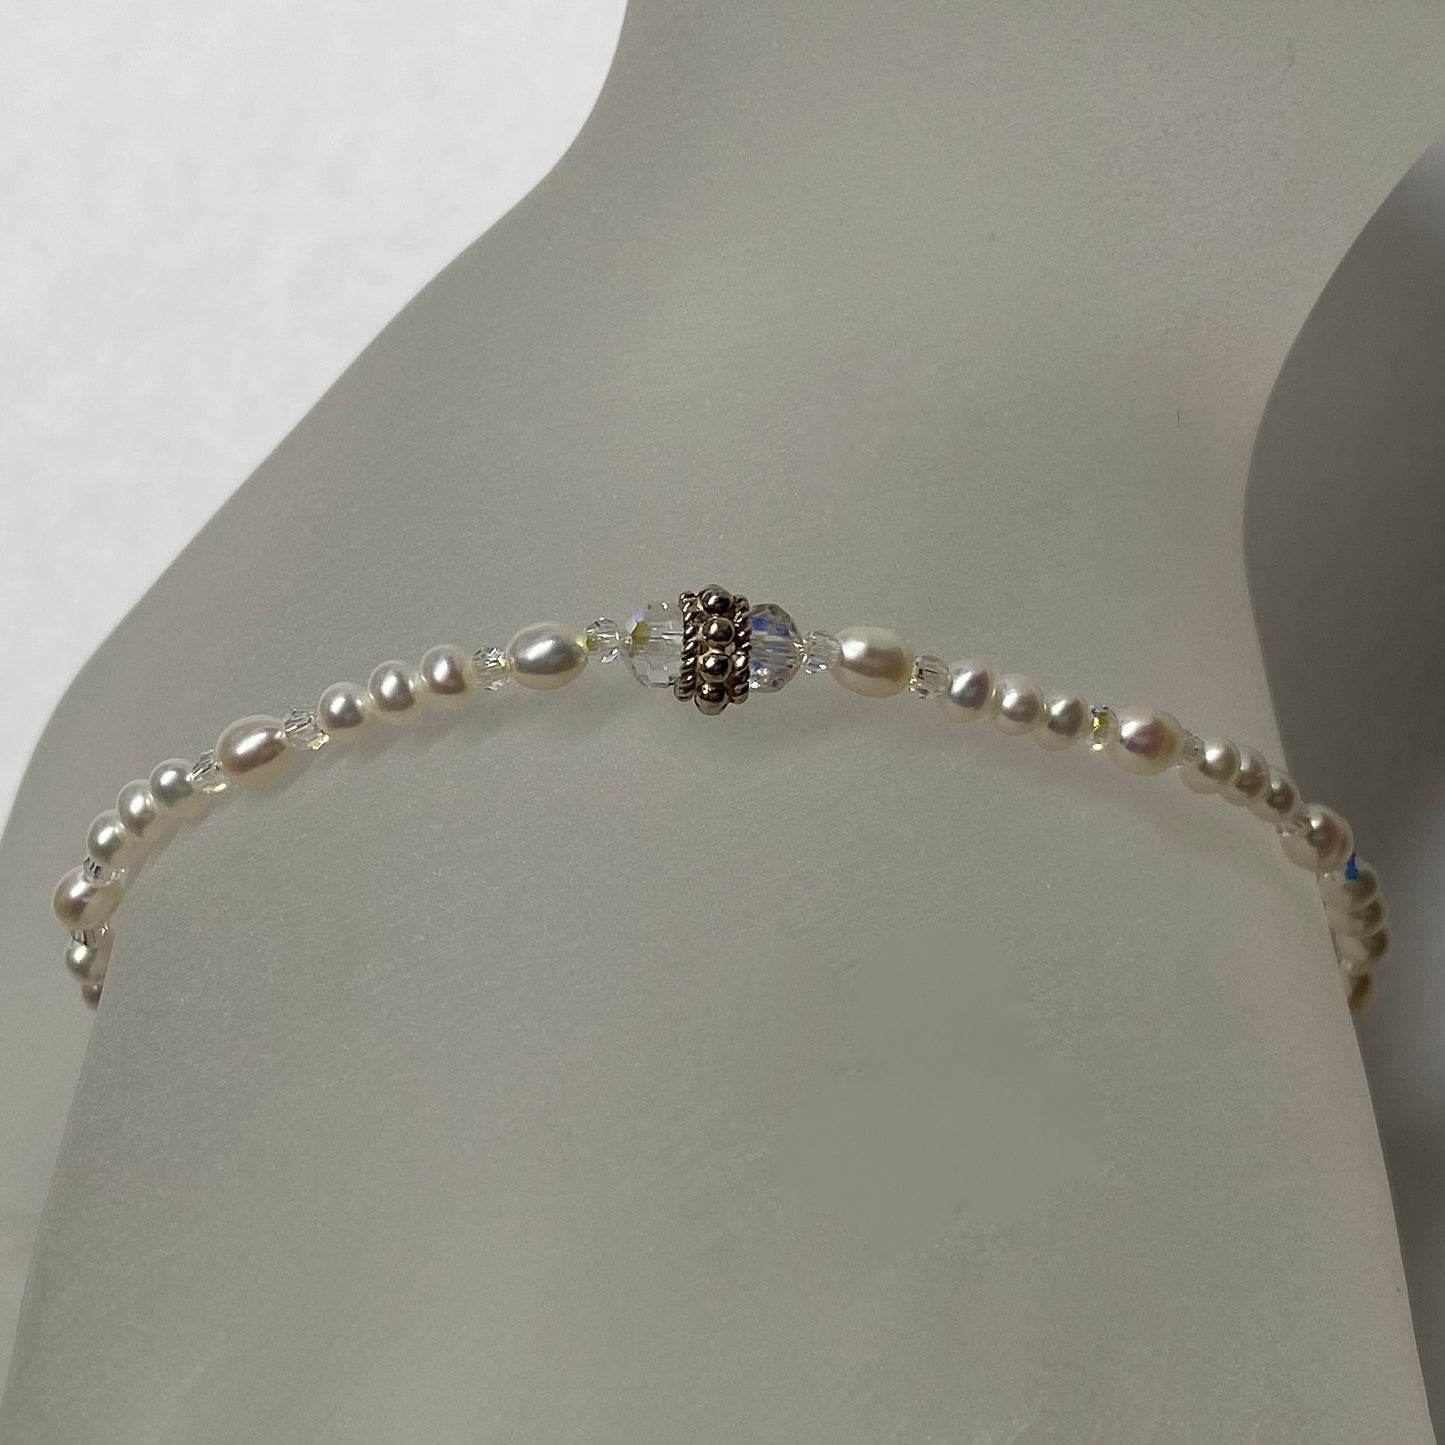 7" Arpaia stretch bracelet with baby pearls & crystal